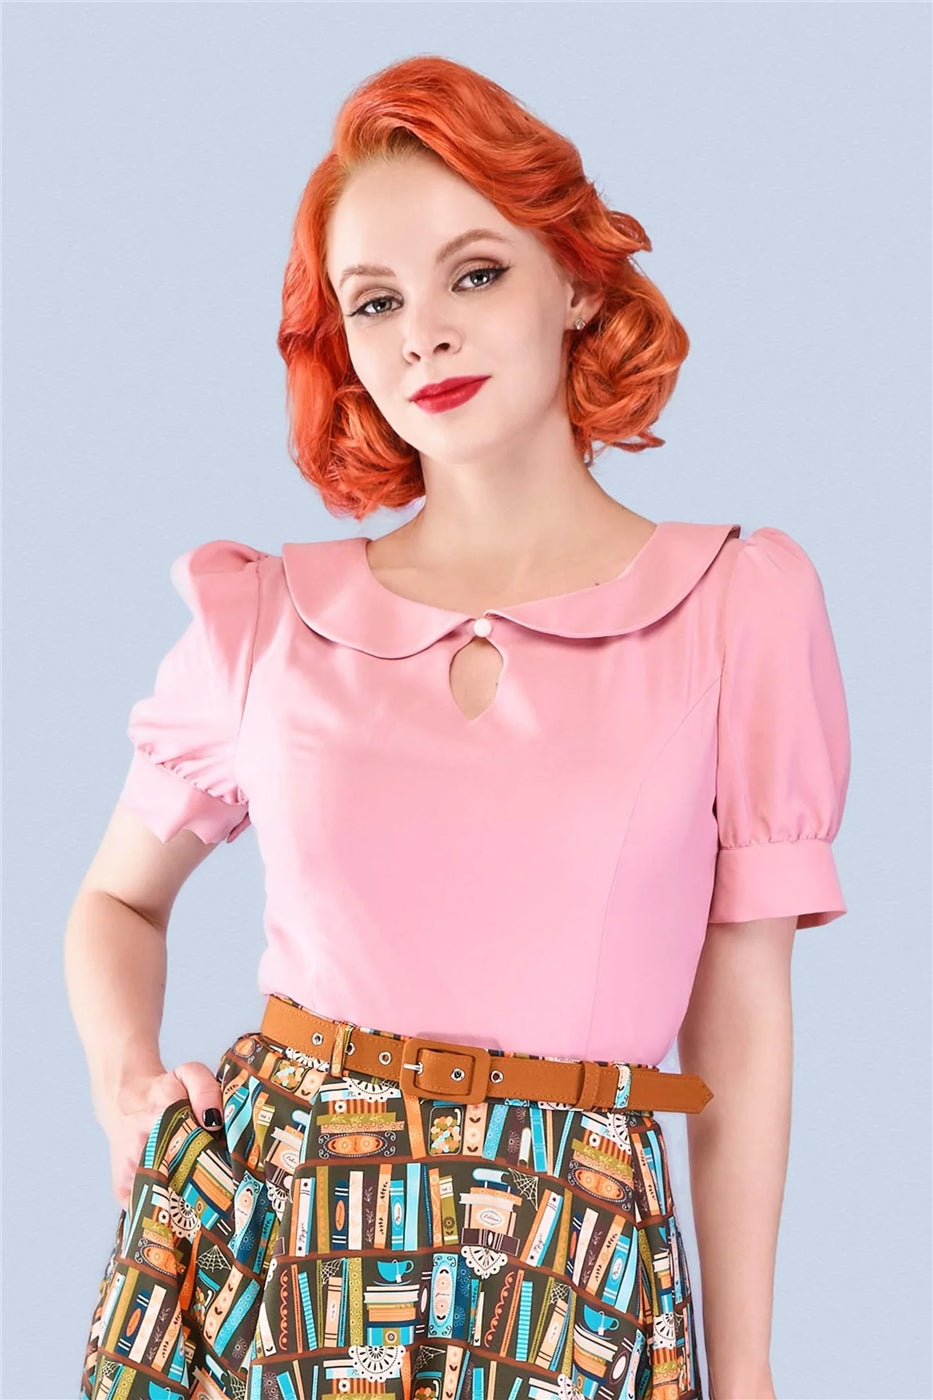 Glamorous woman with ginger hair and red lipstick wearing a pink keyhole detail blouse with short puff sleeves and book print skirt standing with one hand in her skirt pocket